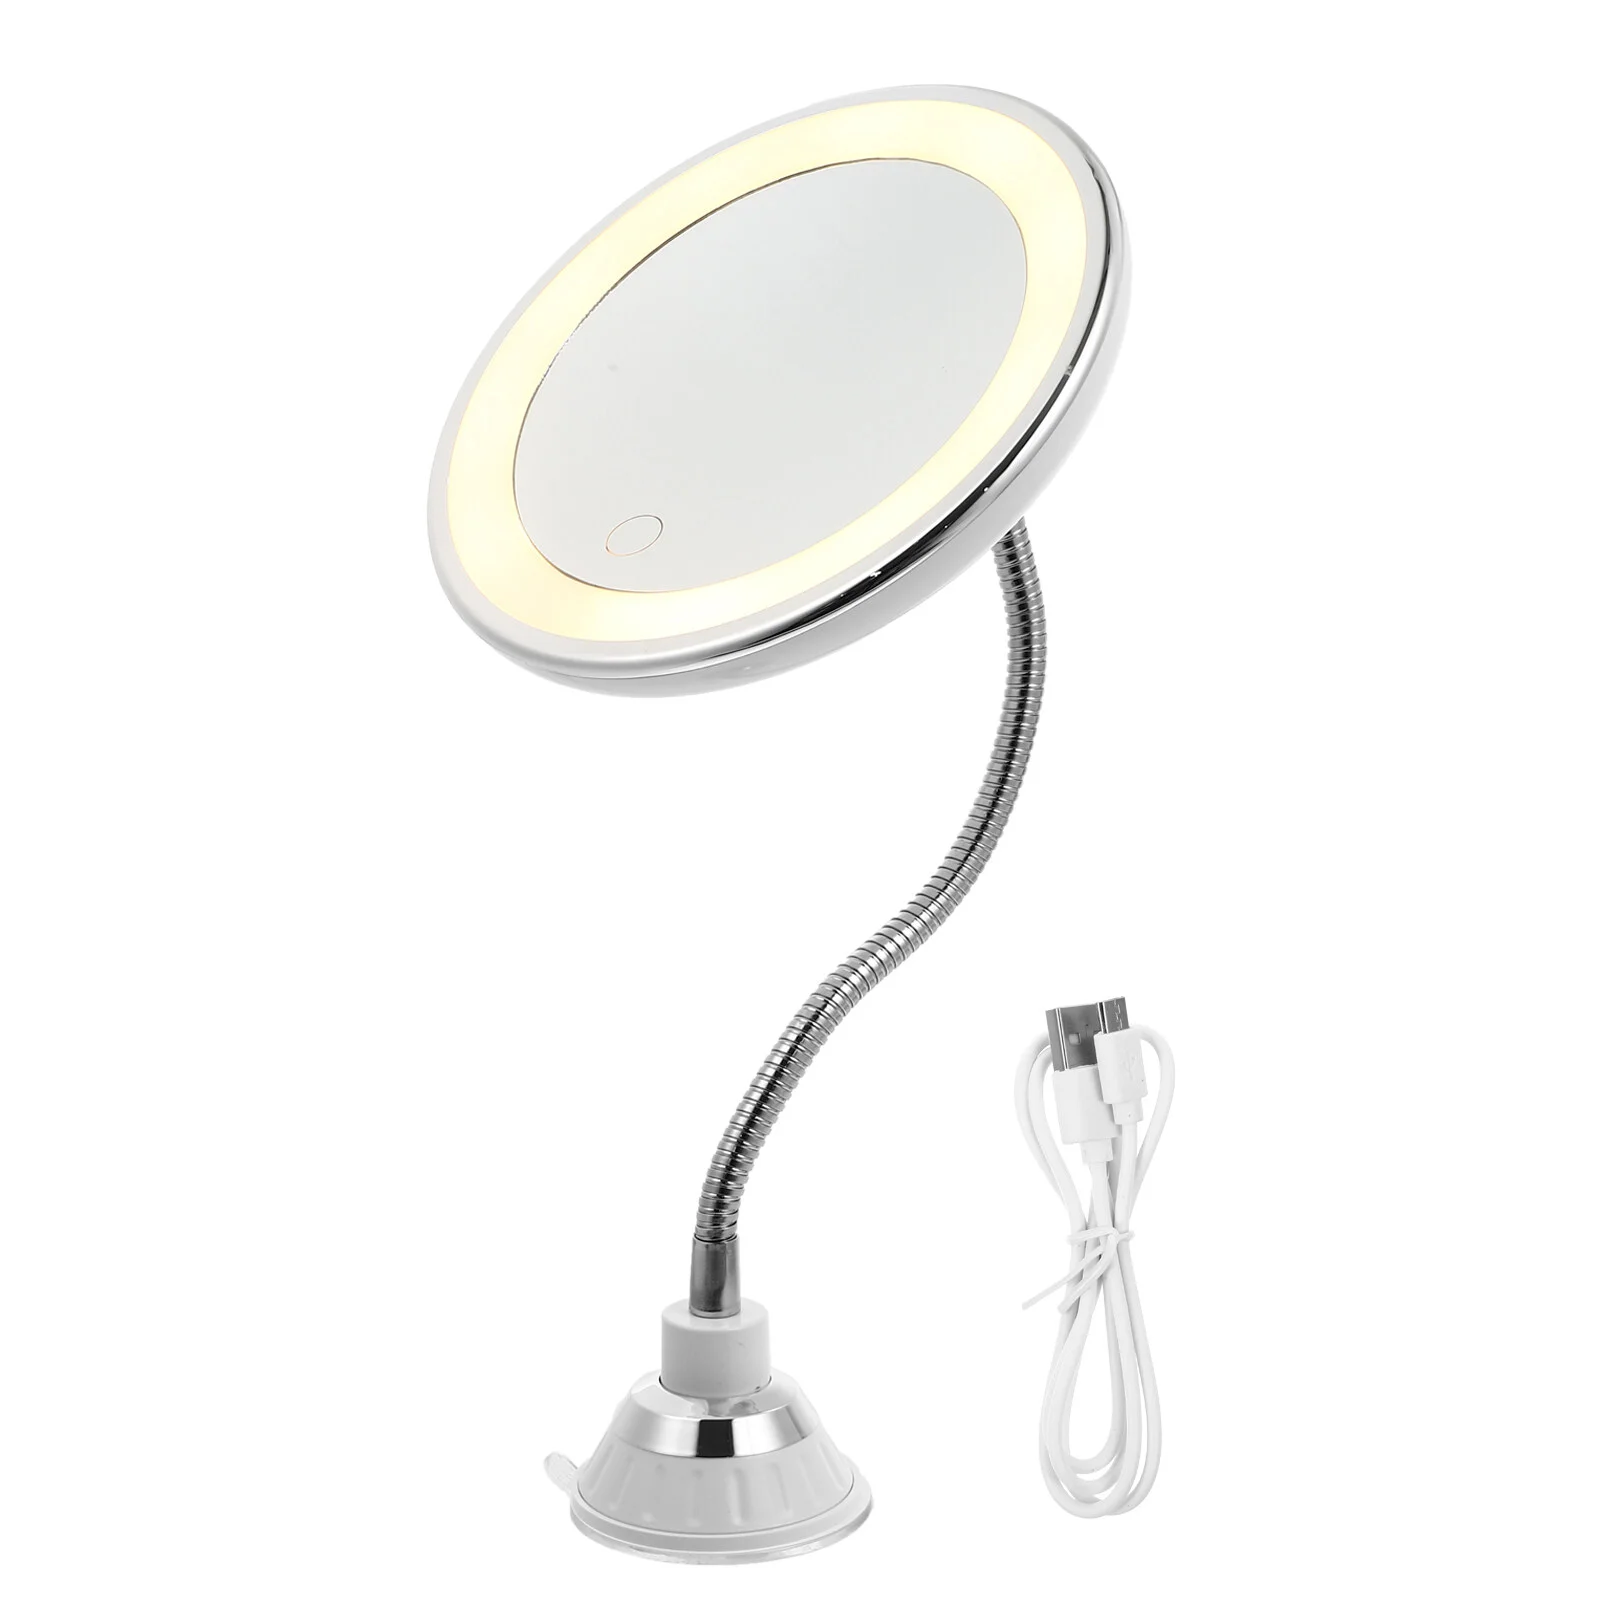 

Vanity Mirror Light LED Lamp Makeup Female Lighted Fold Practical Colored USB Charging Compact Lady Miss Cameras Home